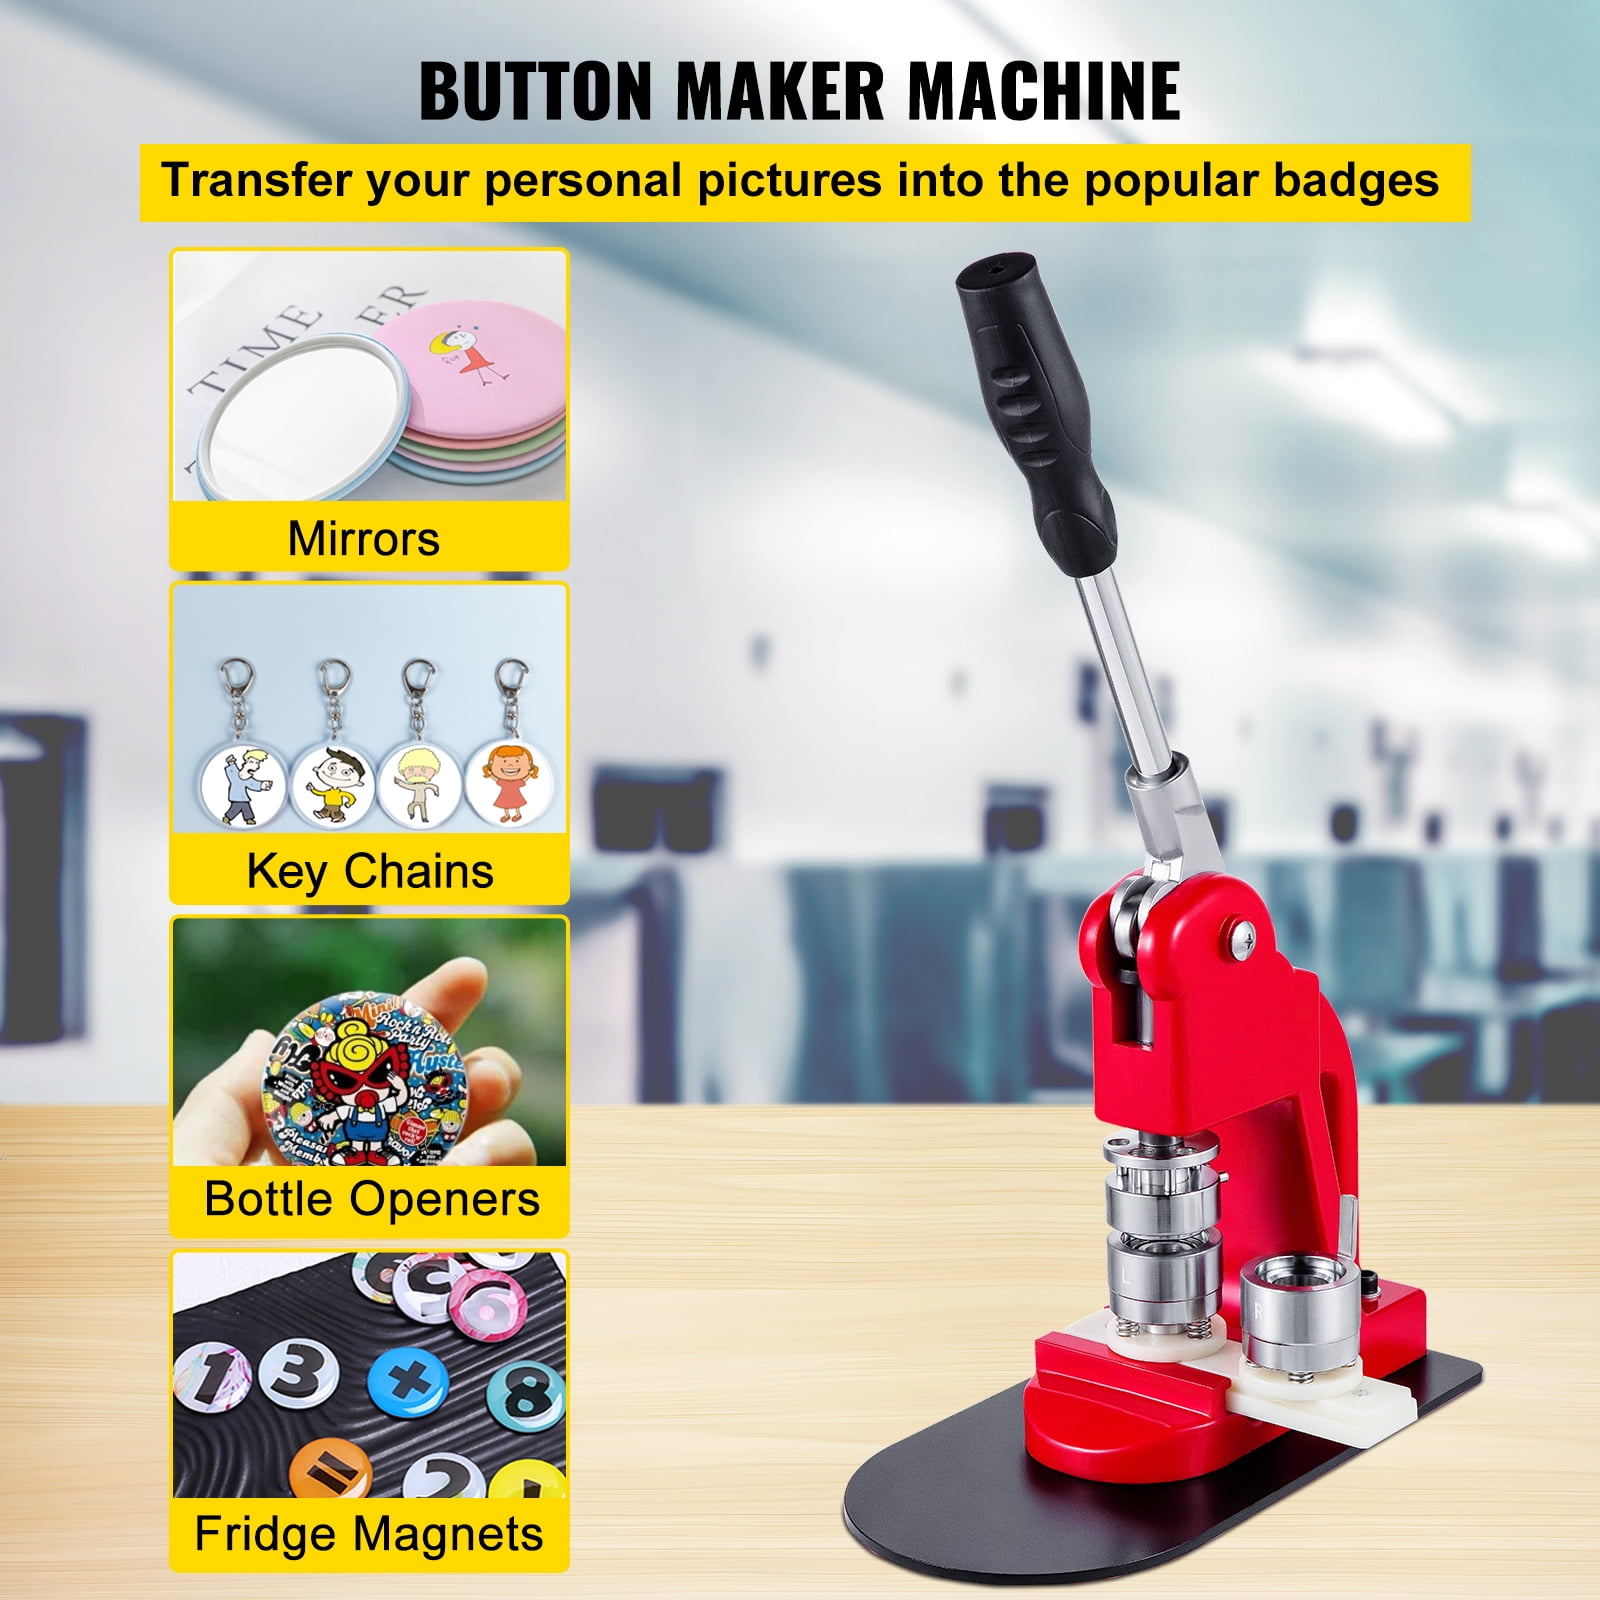  Tigoola Button Maker Machine,25mm(1 inch) Pin Maker  Machine,Button Press Machine,Badge Press Machine,Craft Gifts for Kids with  Free Button Supplies